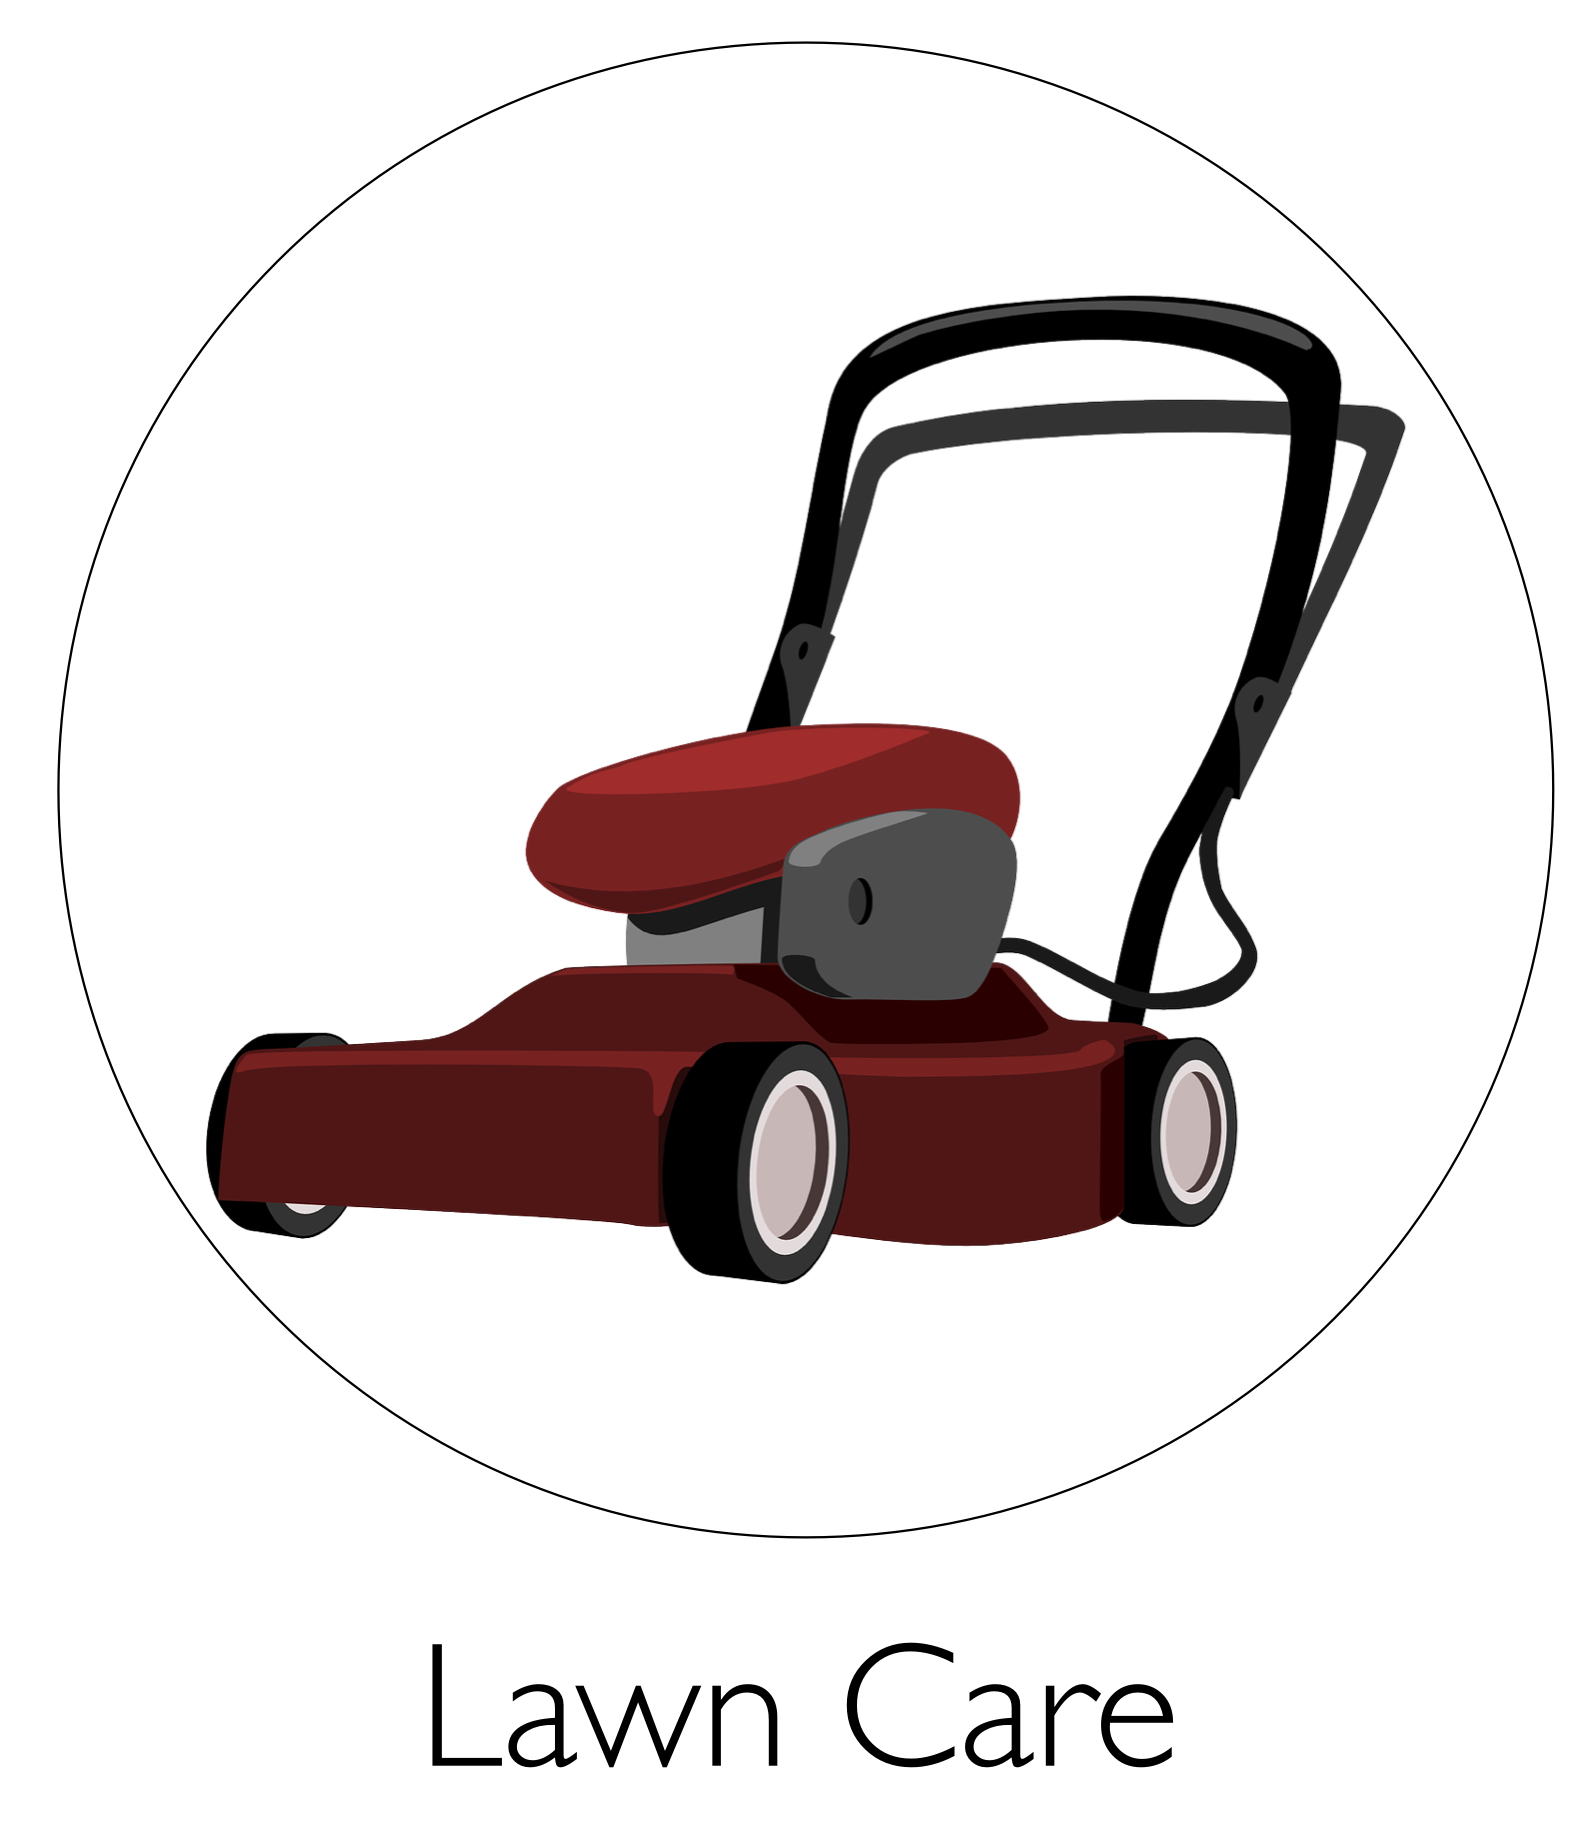 mowing clipart grounds maintenance